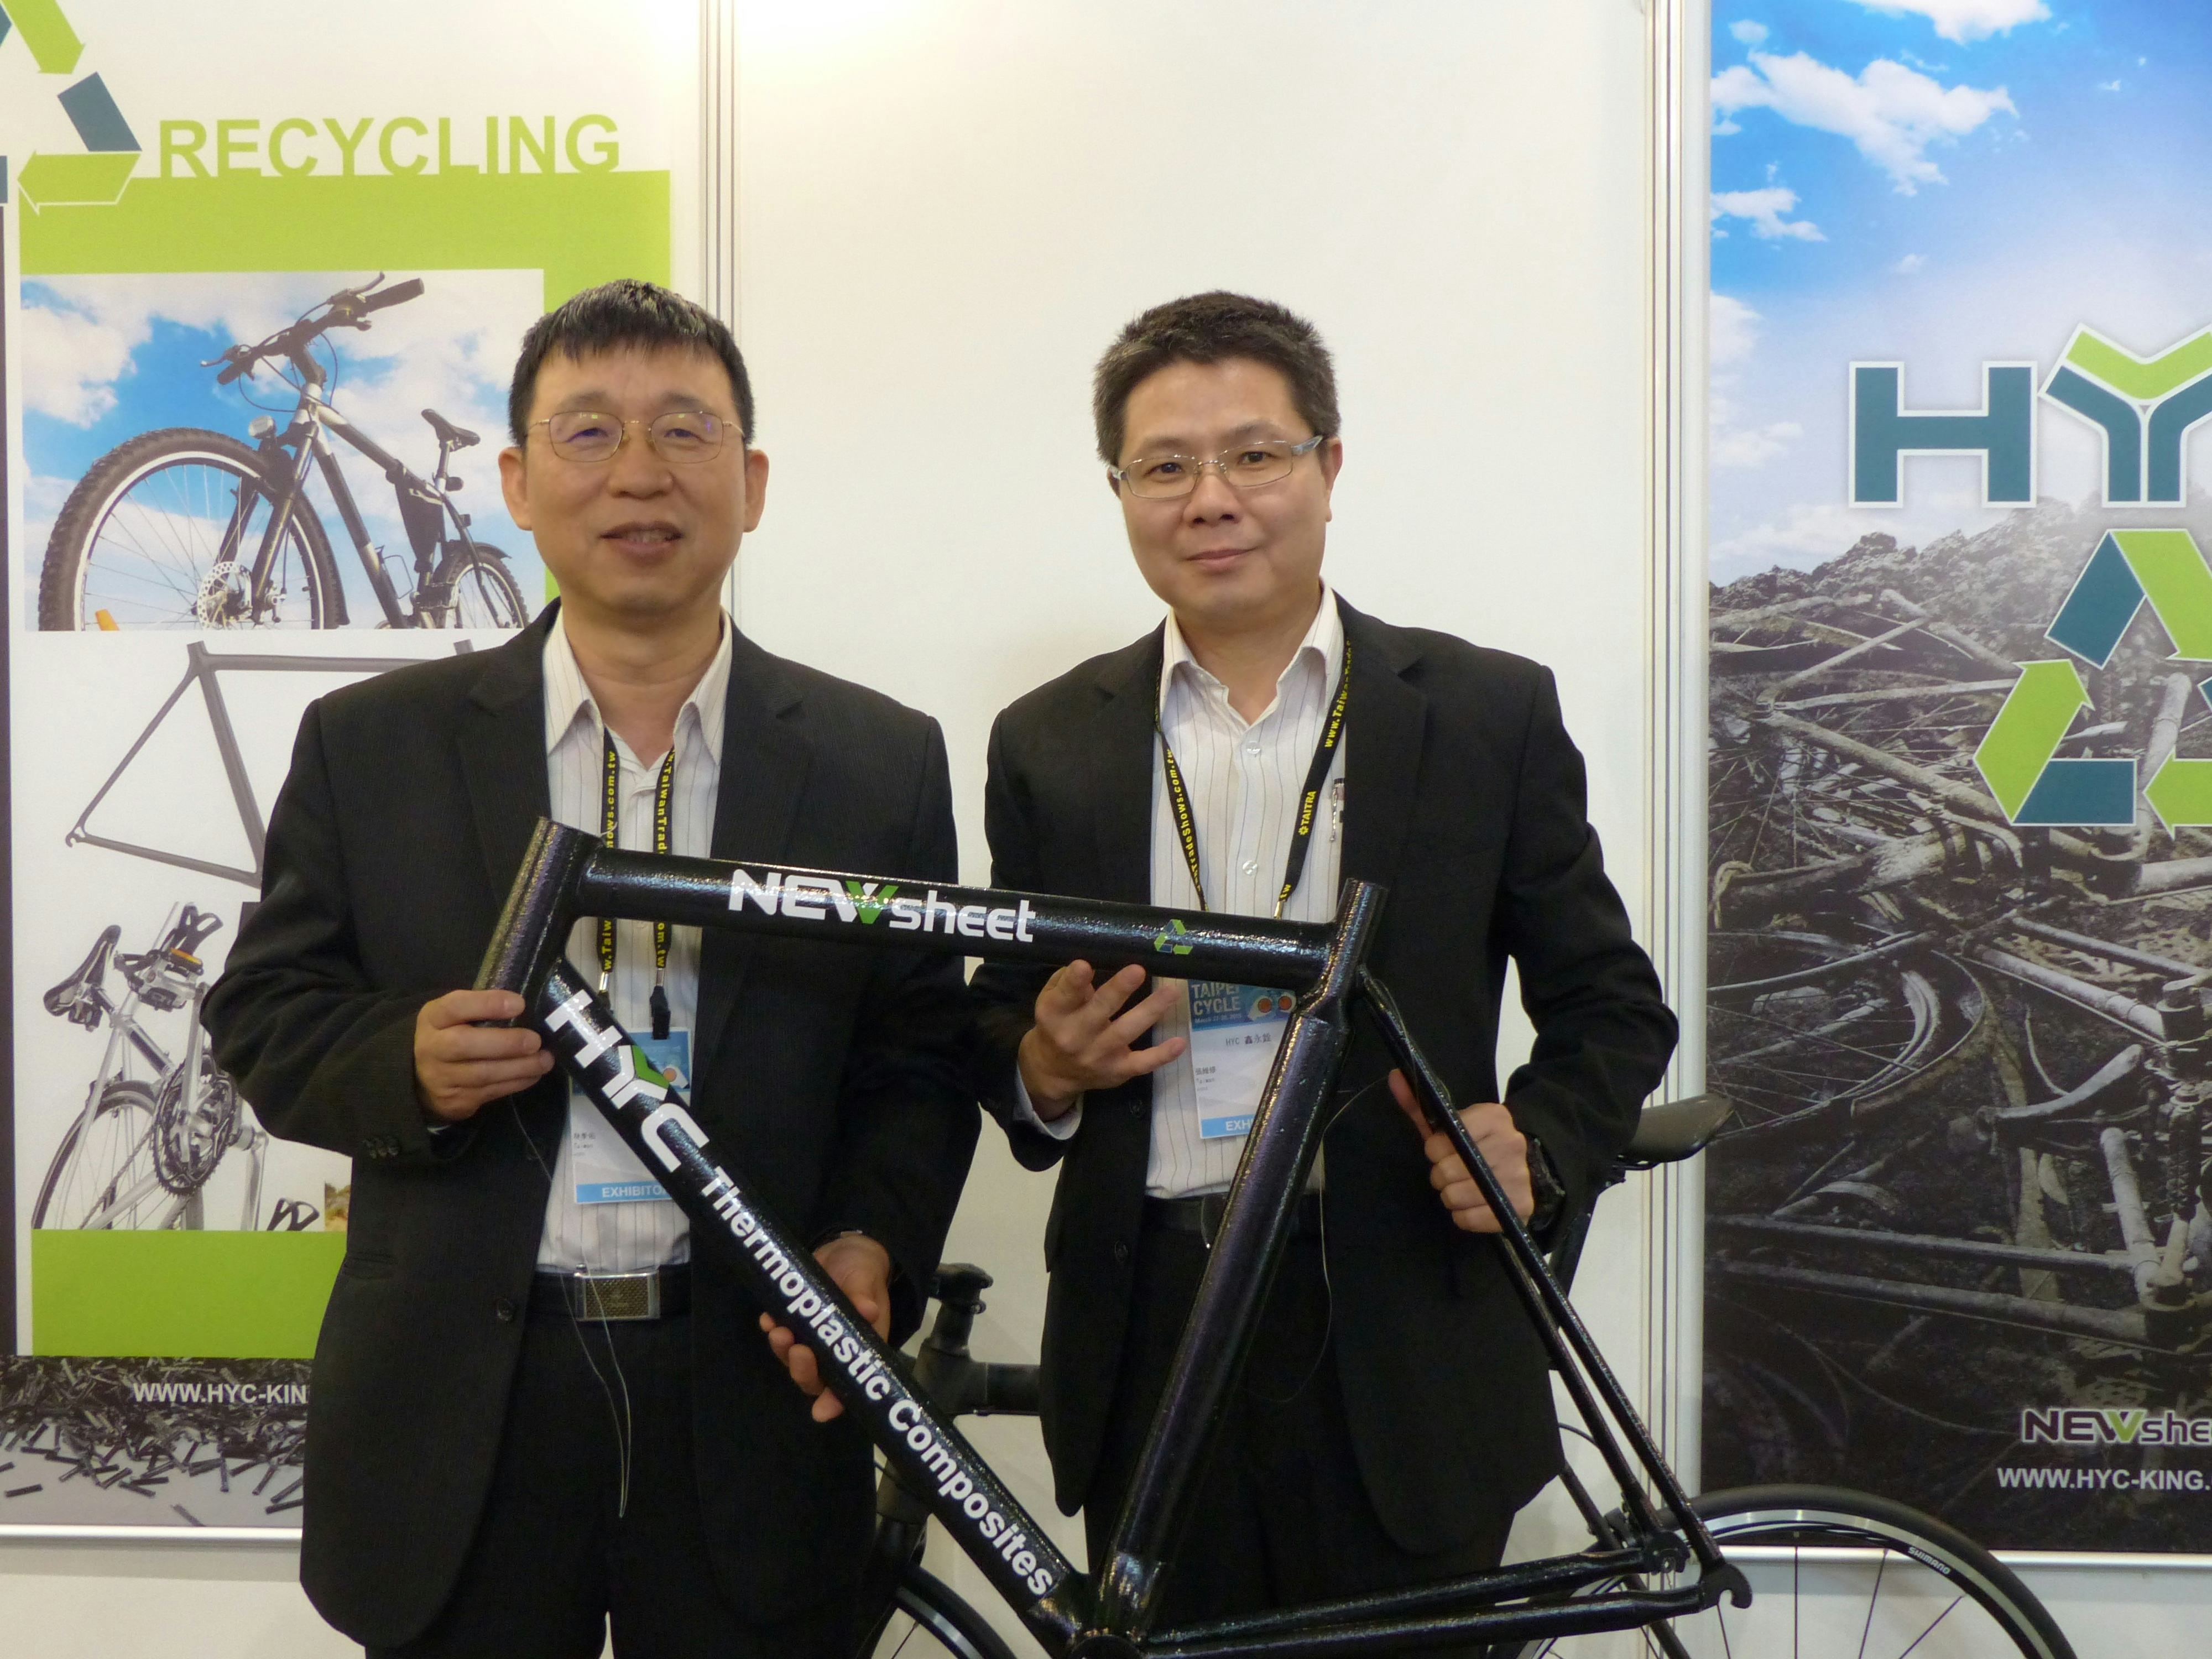 HYC GM Tony Lin (l.) and Manager Alex Chang presenting their frame made of thermoplastic composites. – Photo Bike Europe